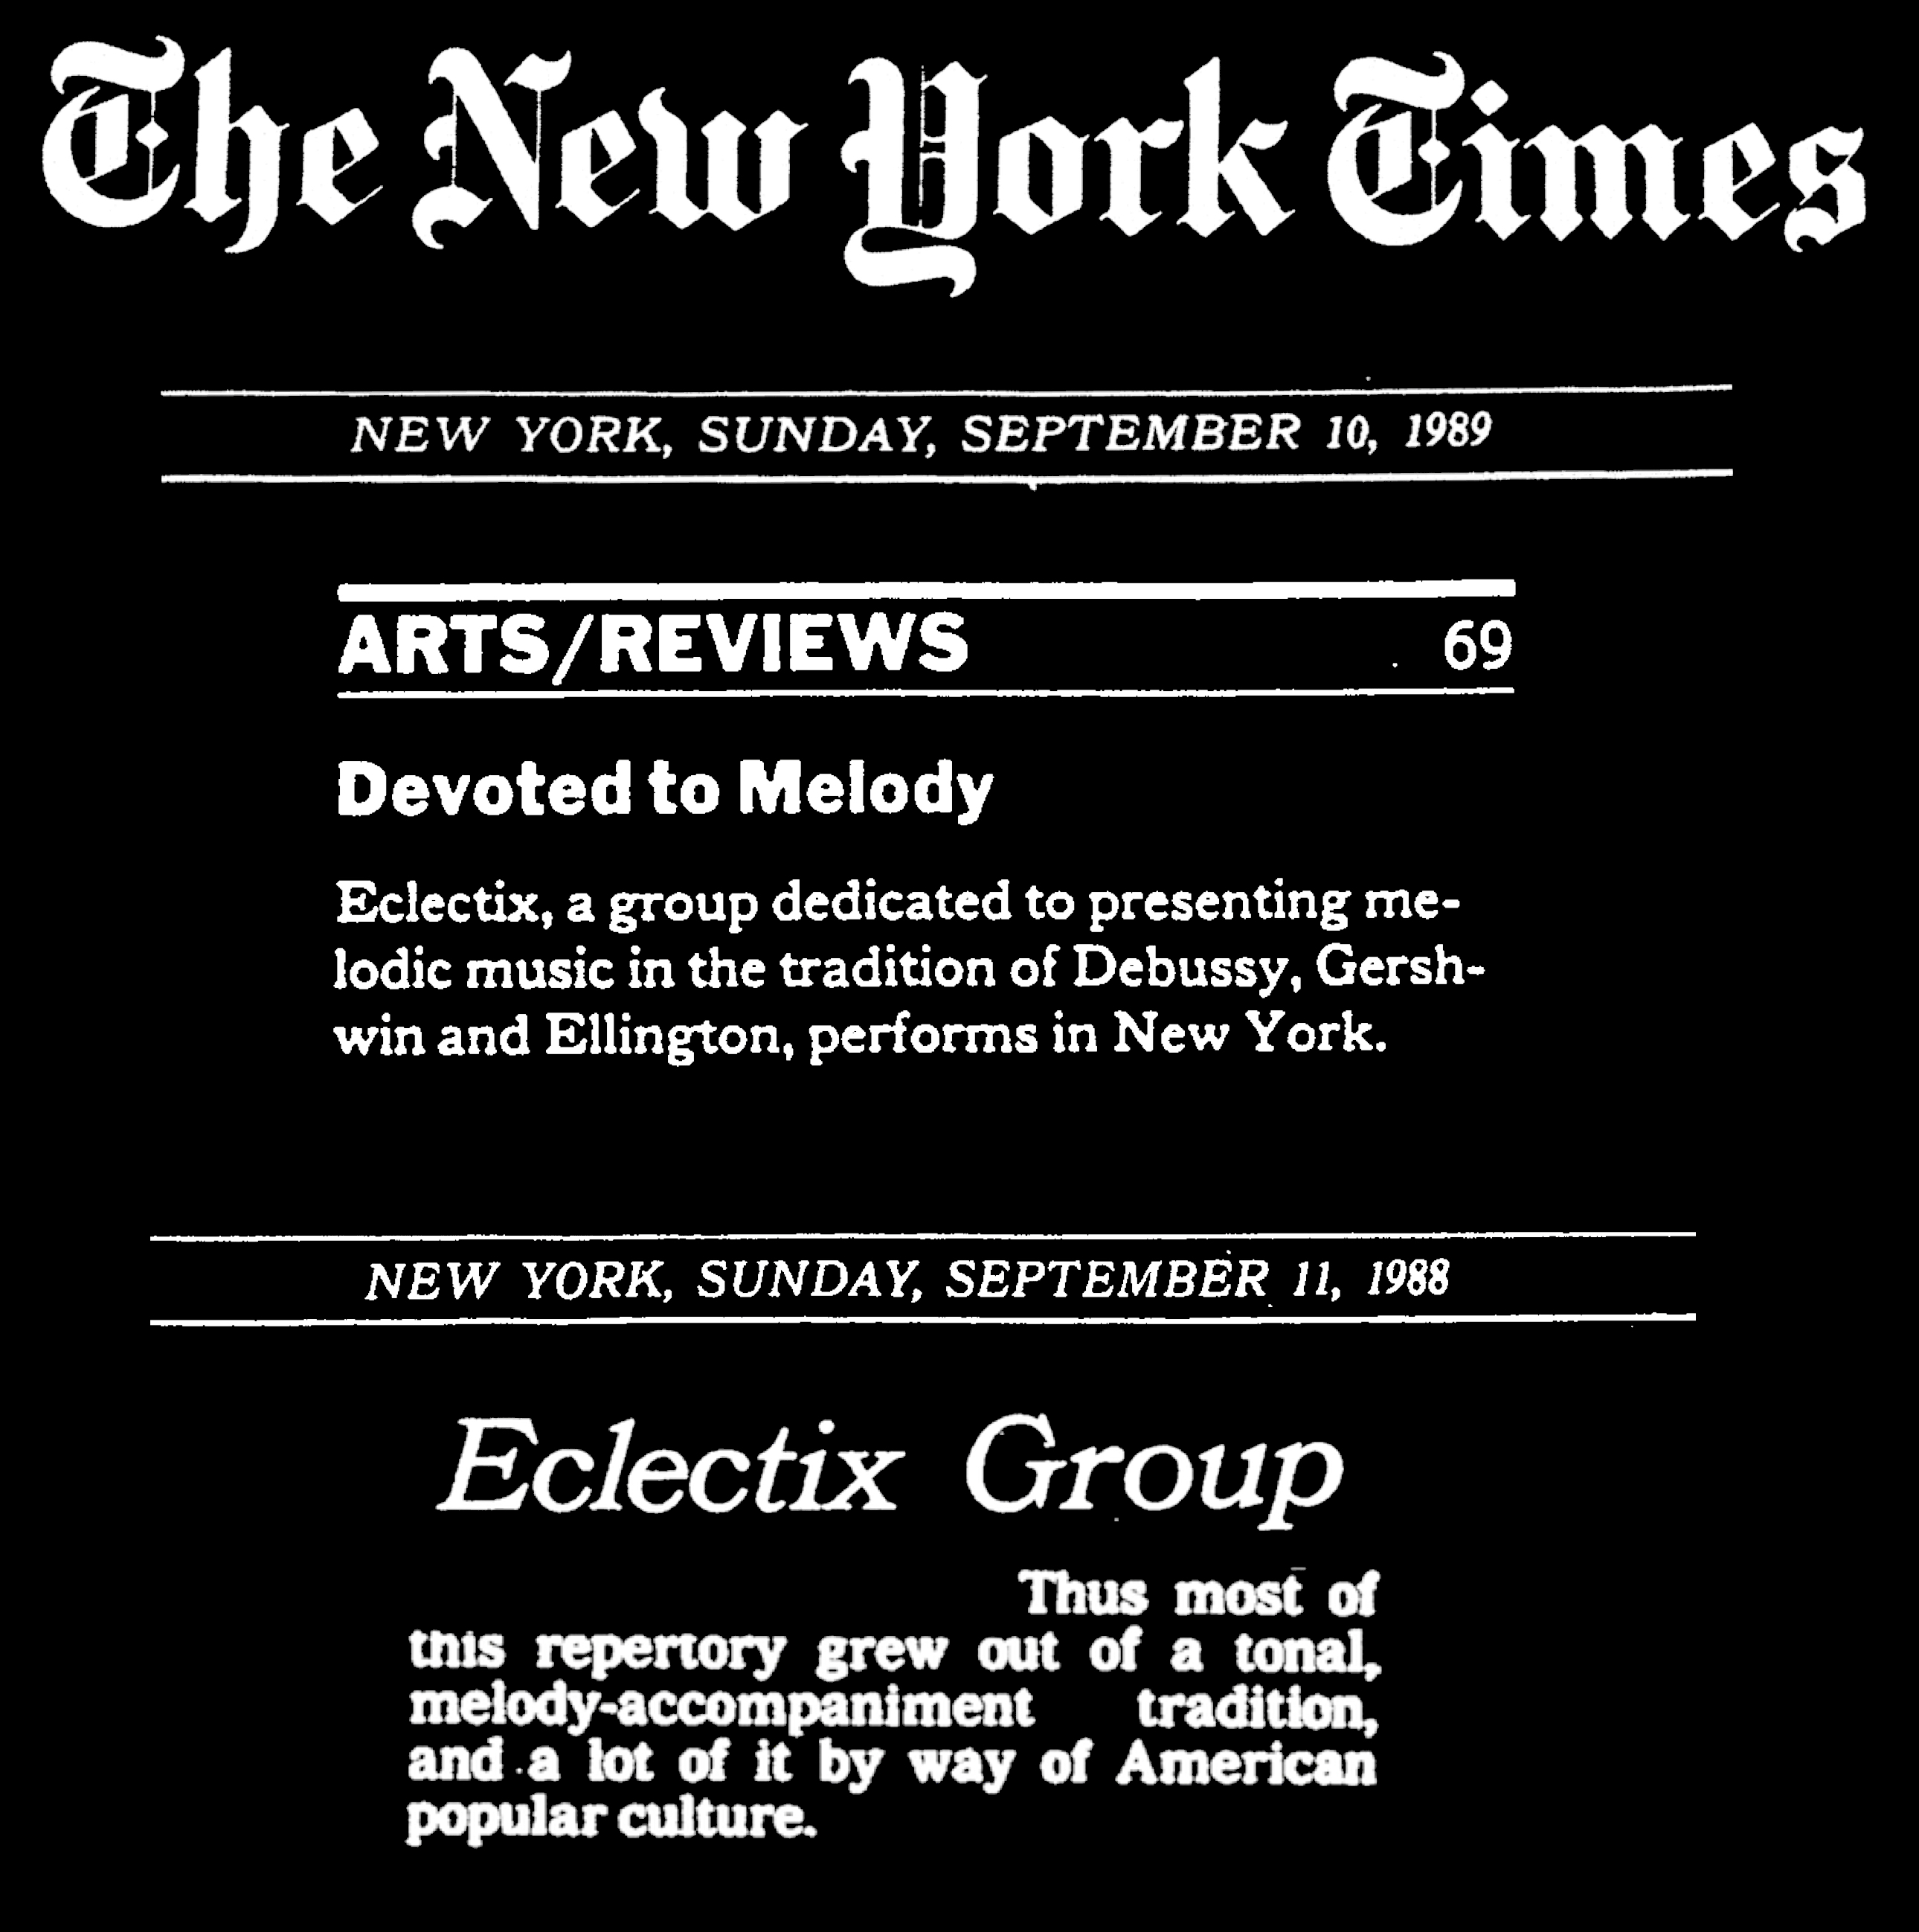 New York Times, 2 quotes from reviews